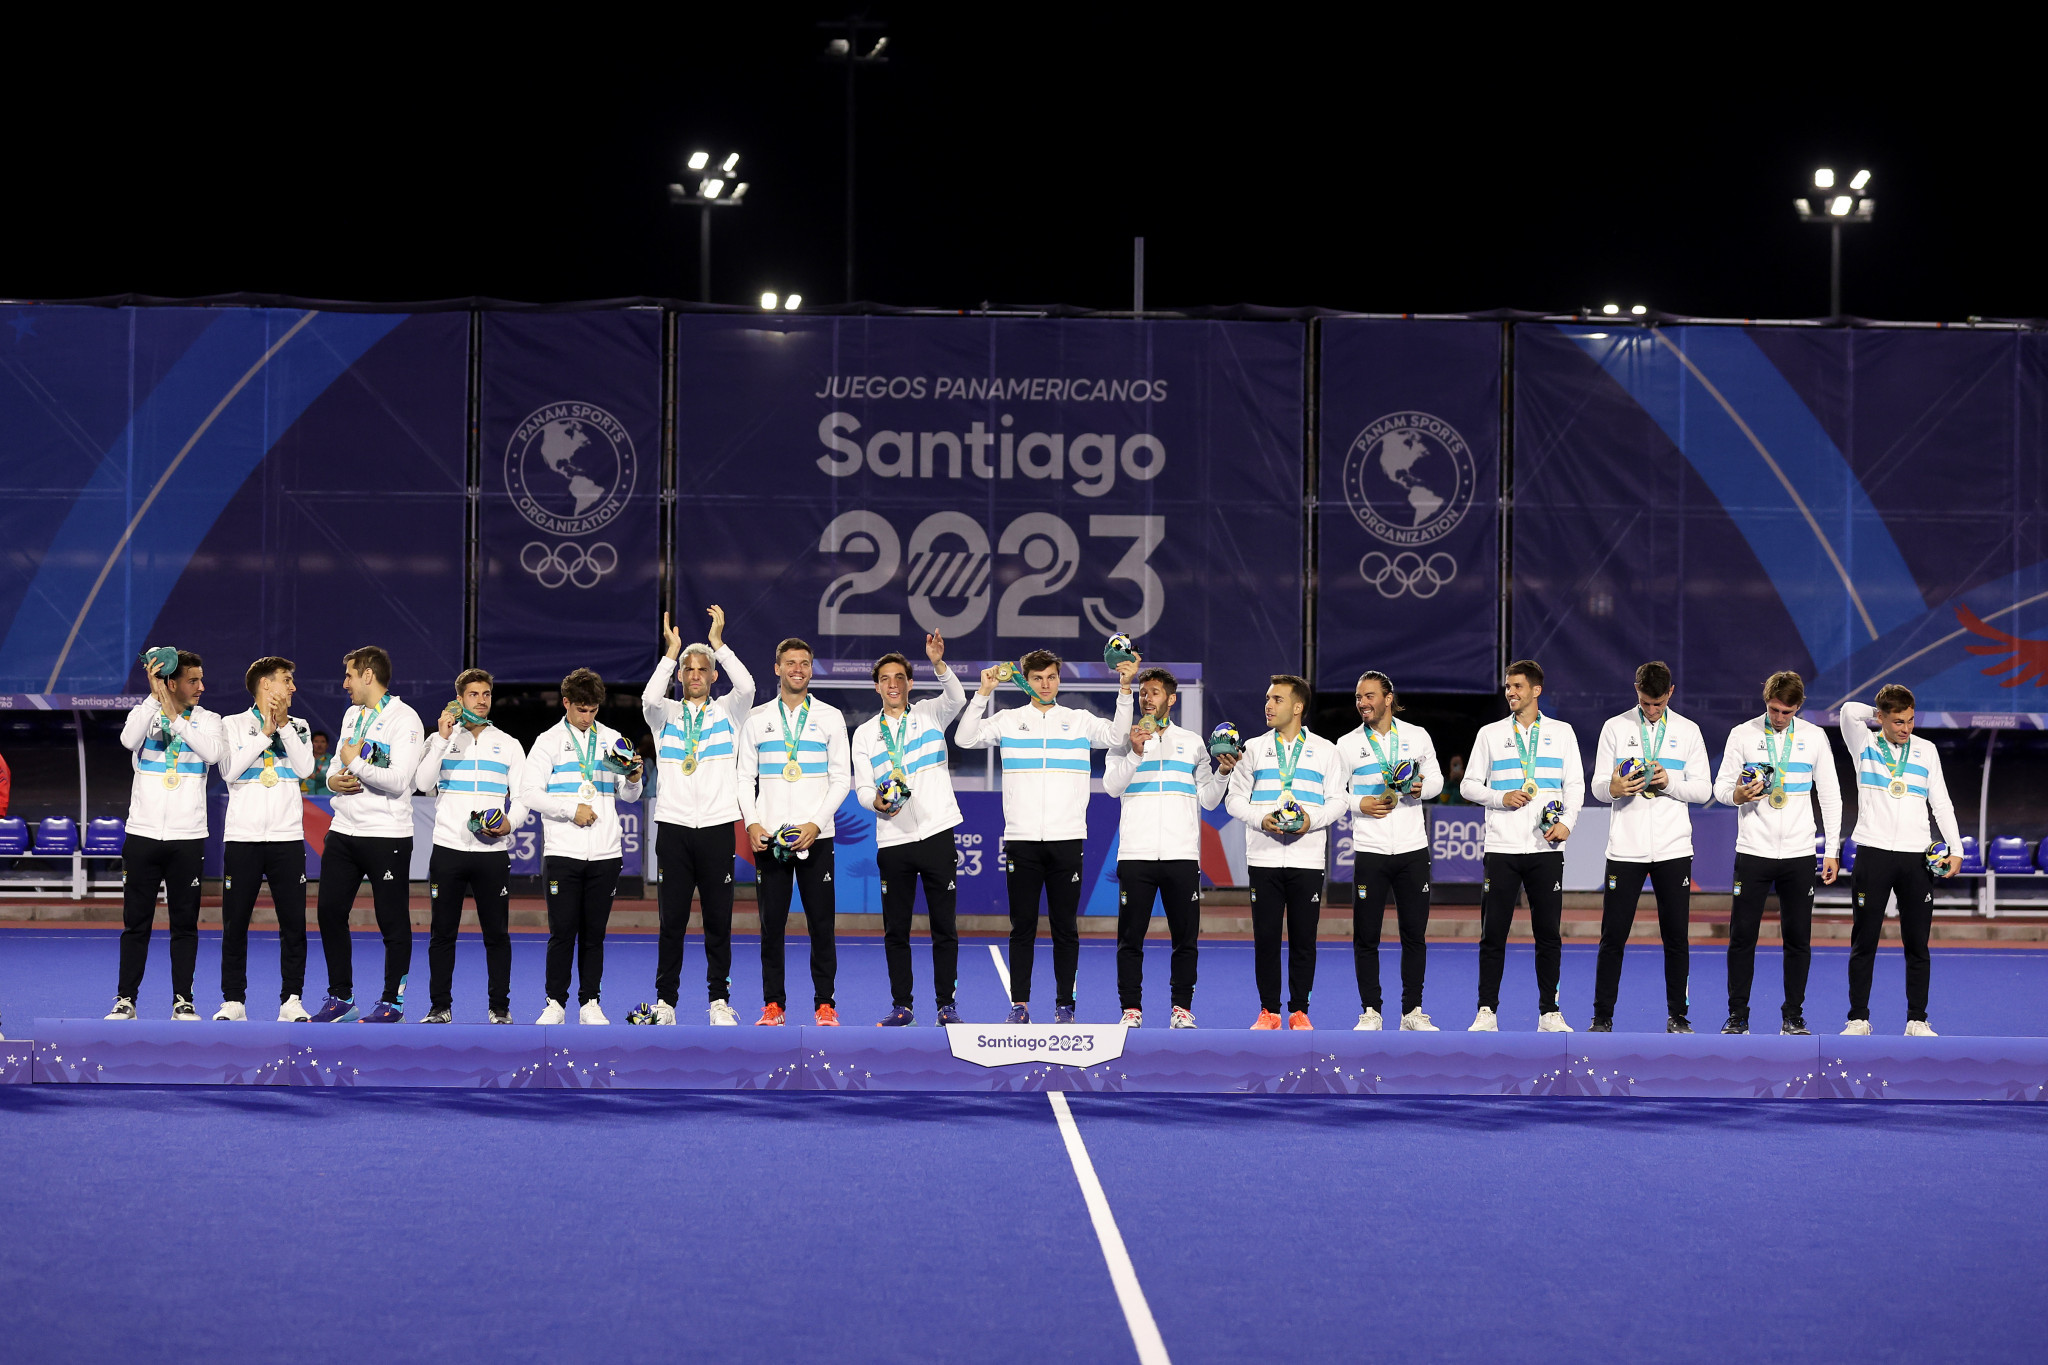 Team Argentina celebrates on the podium after winning the Men's Hockey Gold Medal match against Team Chile in Santiago 2023 Pan Am Games on November 03, 2023 in Santiago, Chile. © Getty Images